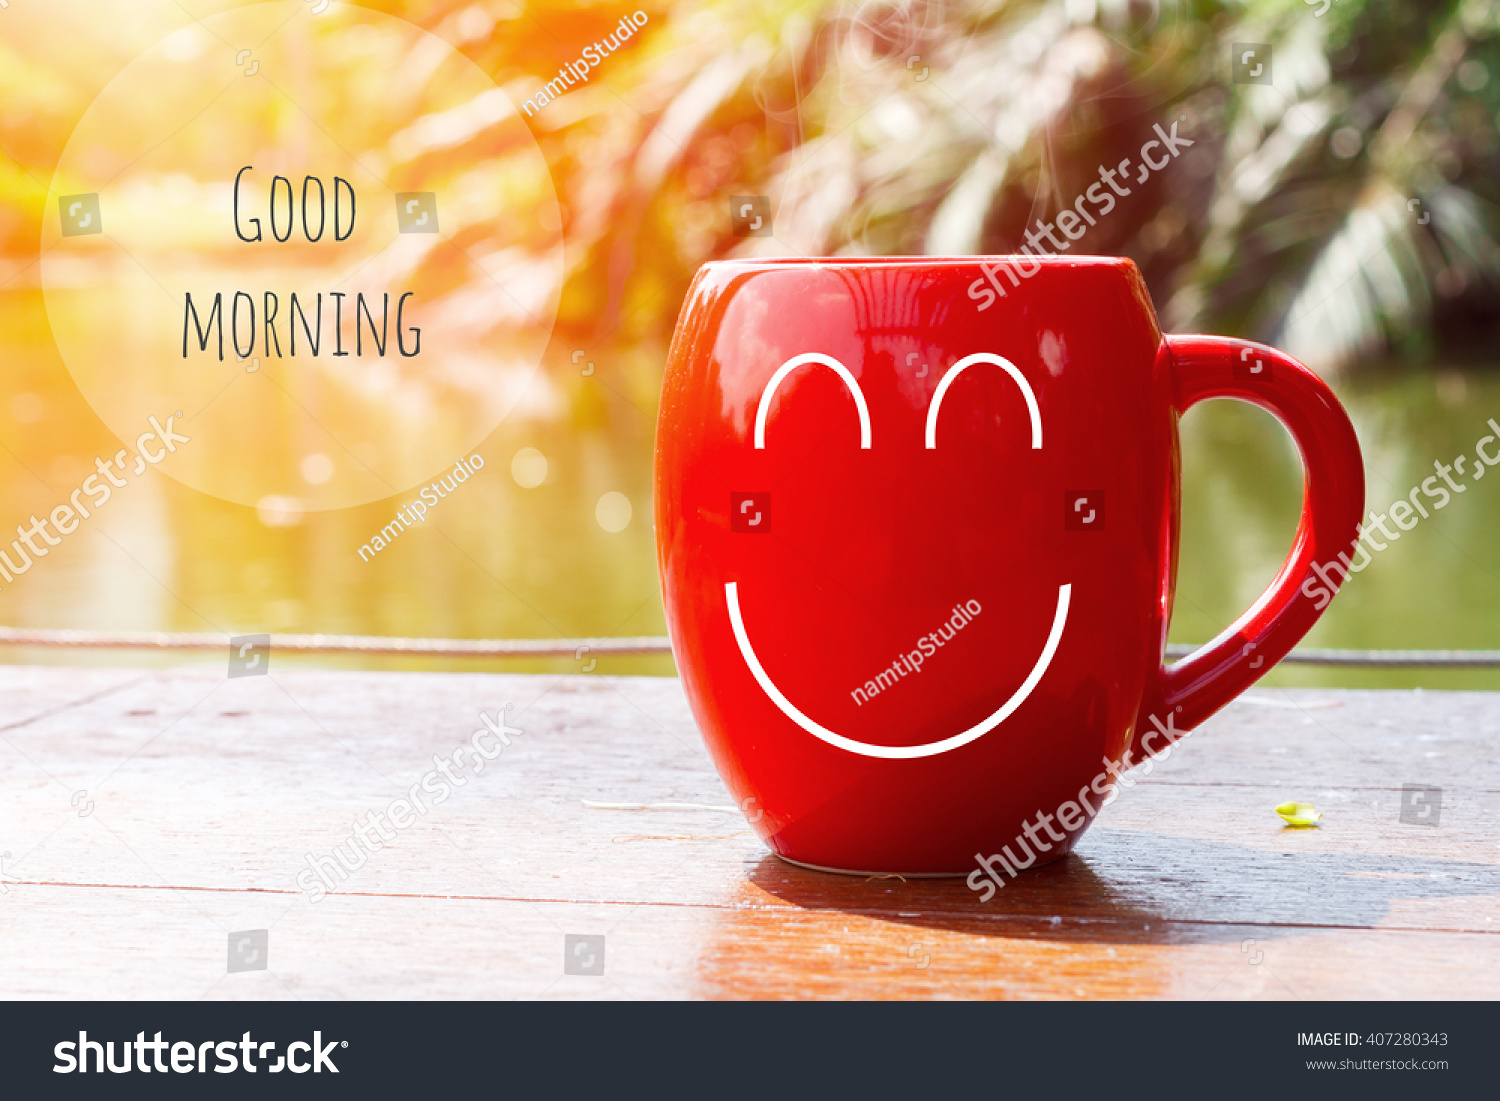 red coffee cup empty front porch the morning. Good morning or Have a happy day message concept #407280343